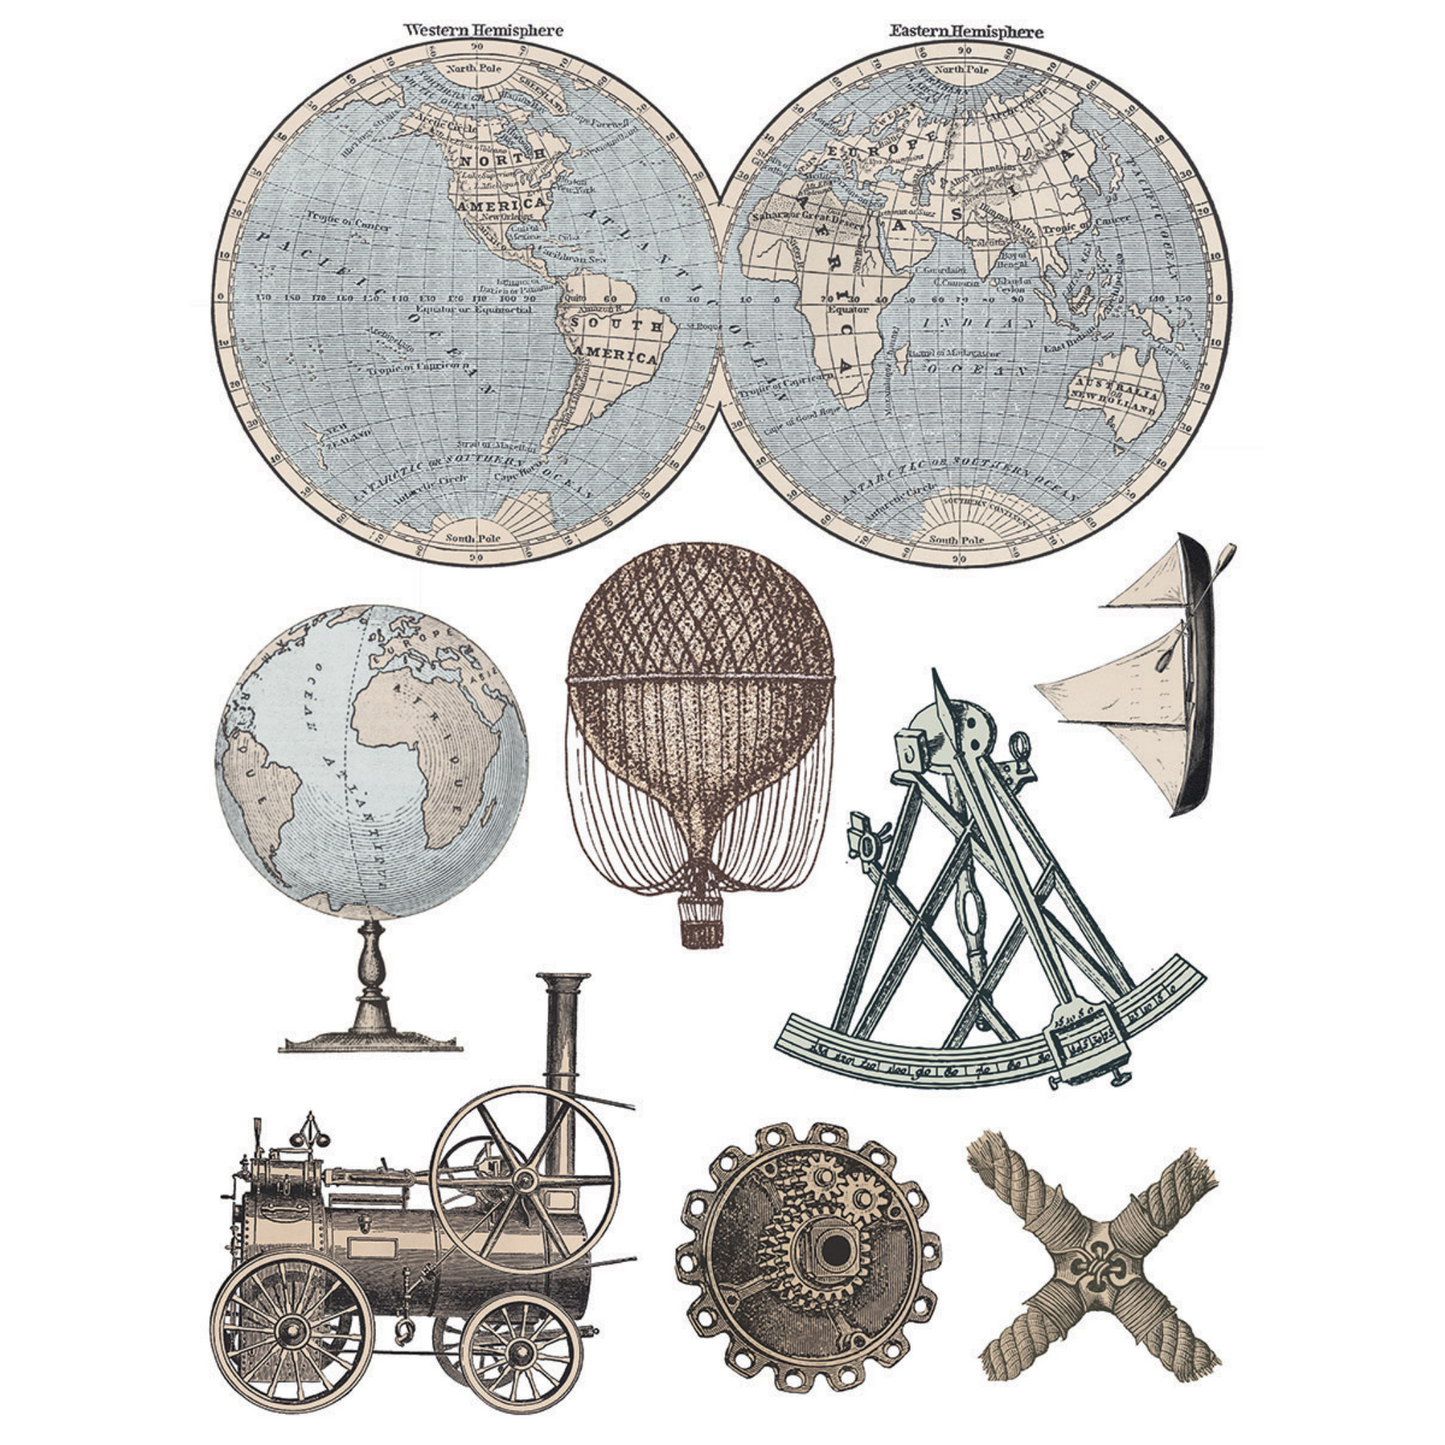 Exploration - IOD Transfer by Iron Orchid Designs page 2 of 8 sheets features vintage images of world map, globes, hot air balloon, measuring instruments steam engine at Milton's Daughter